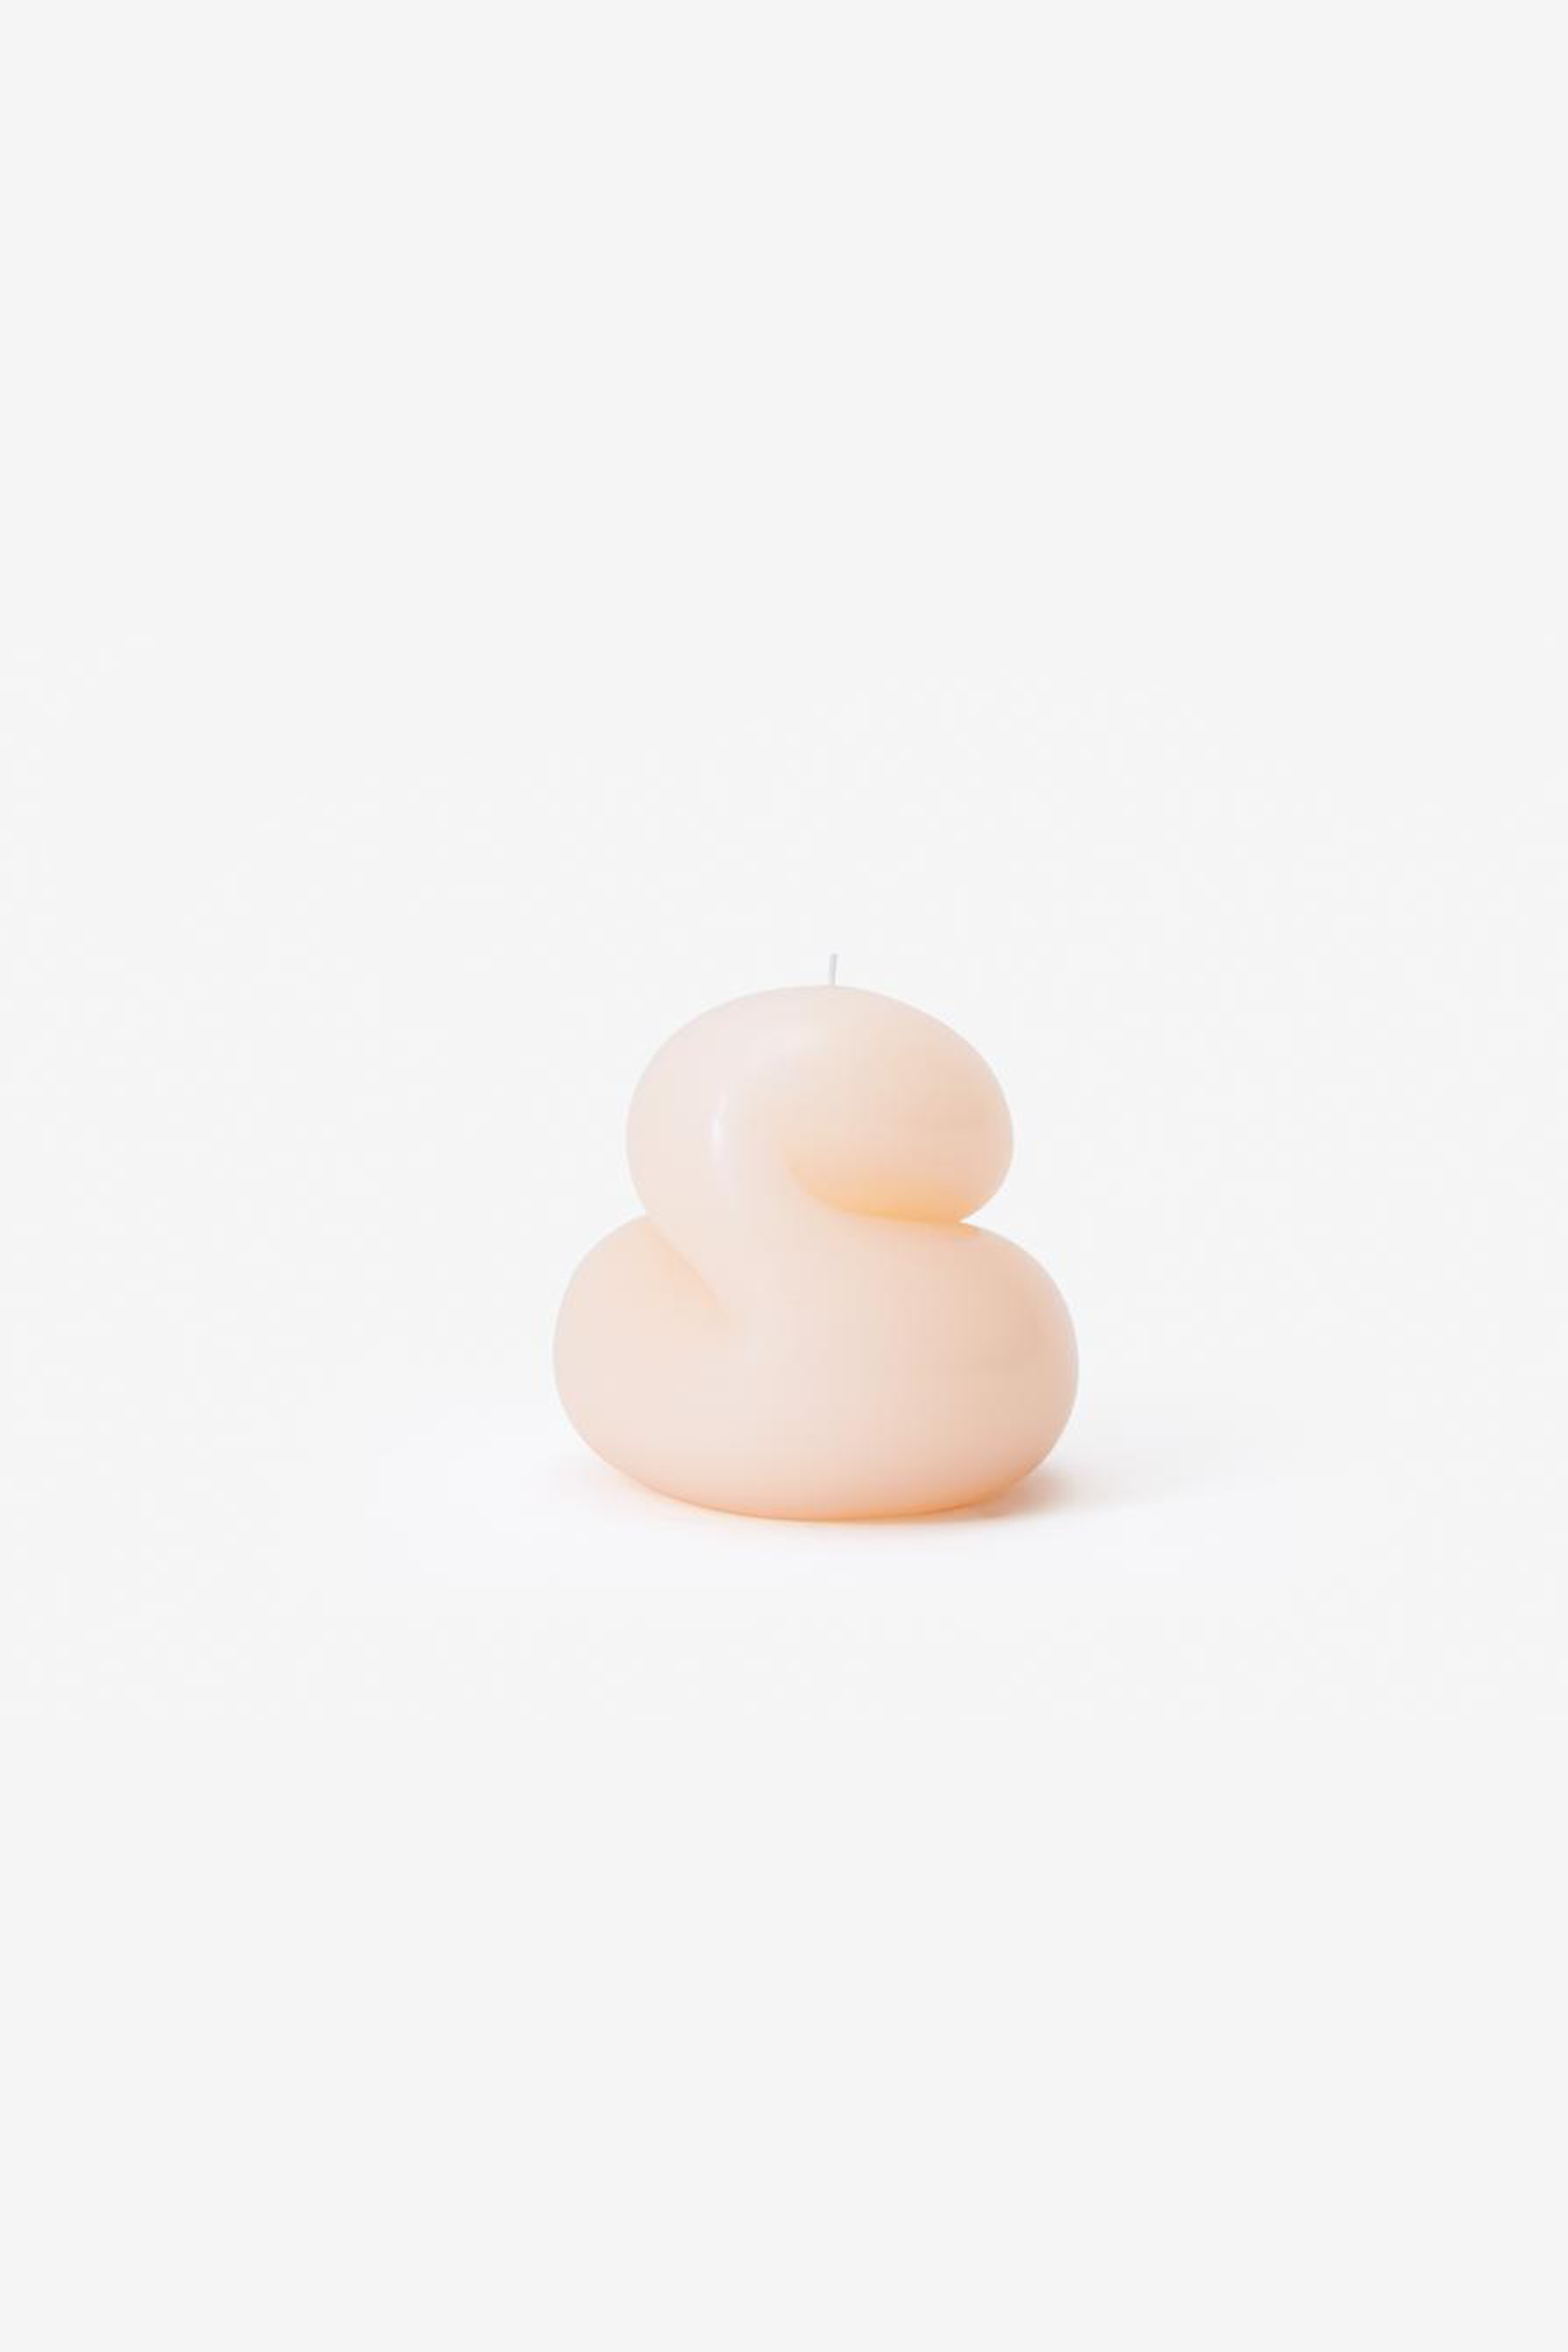 Goober Candle in Eph (Pink)